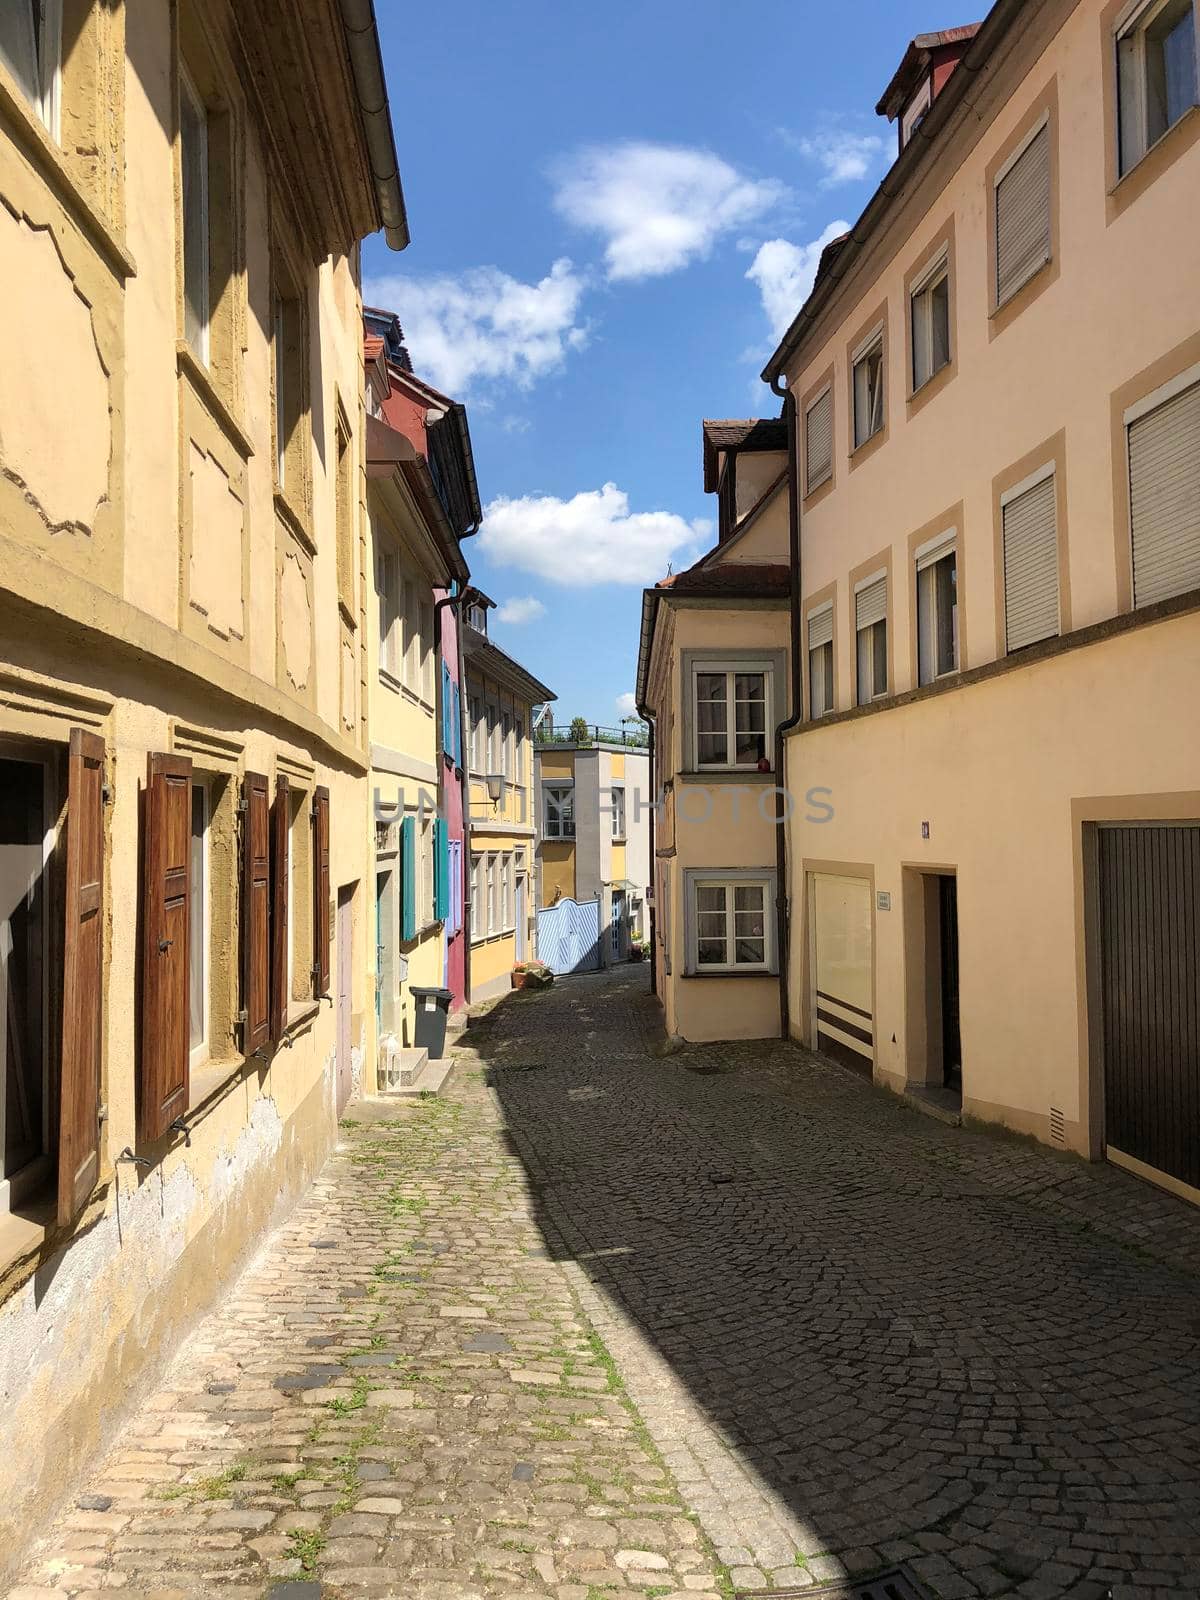 Street in the old town of Bamberg, Germany